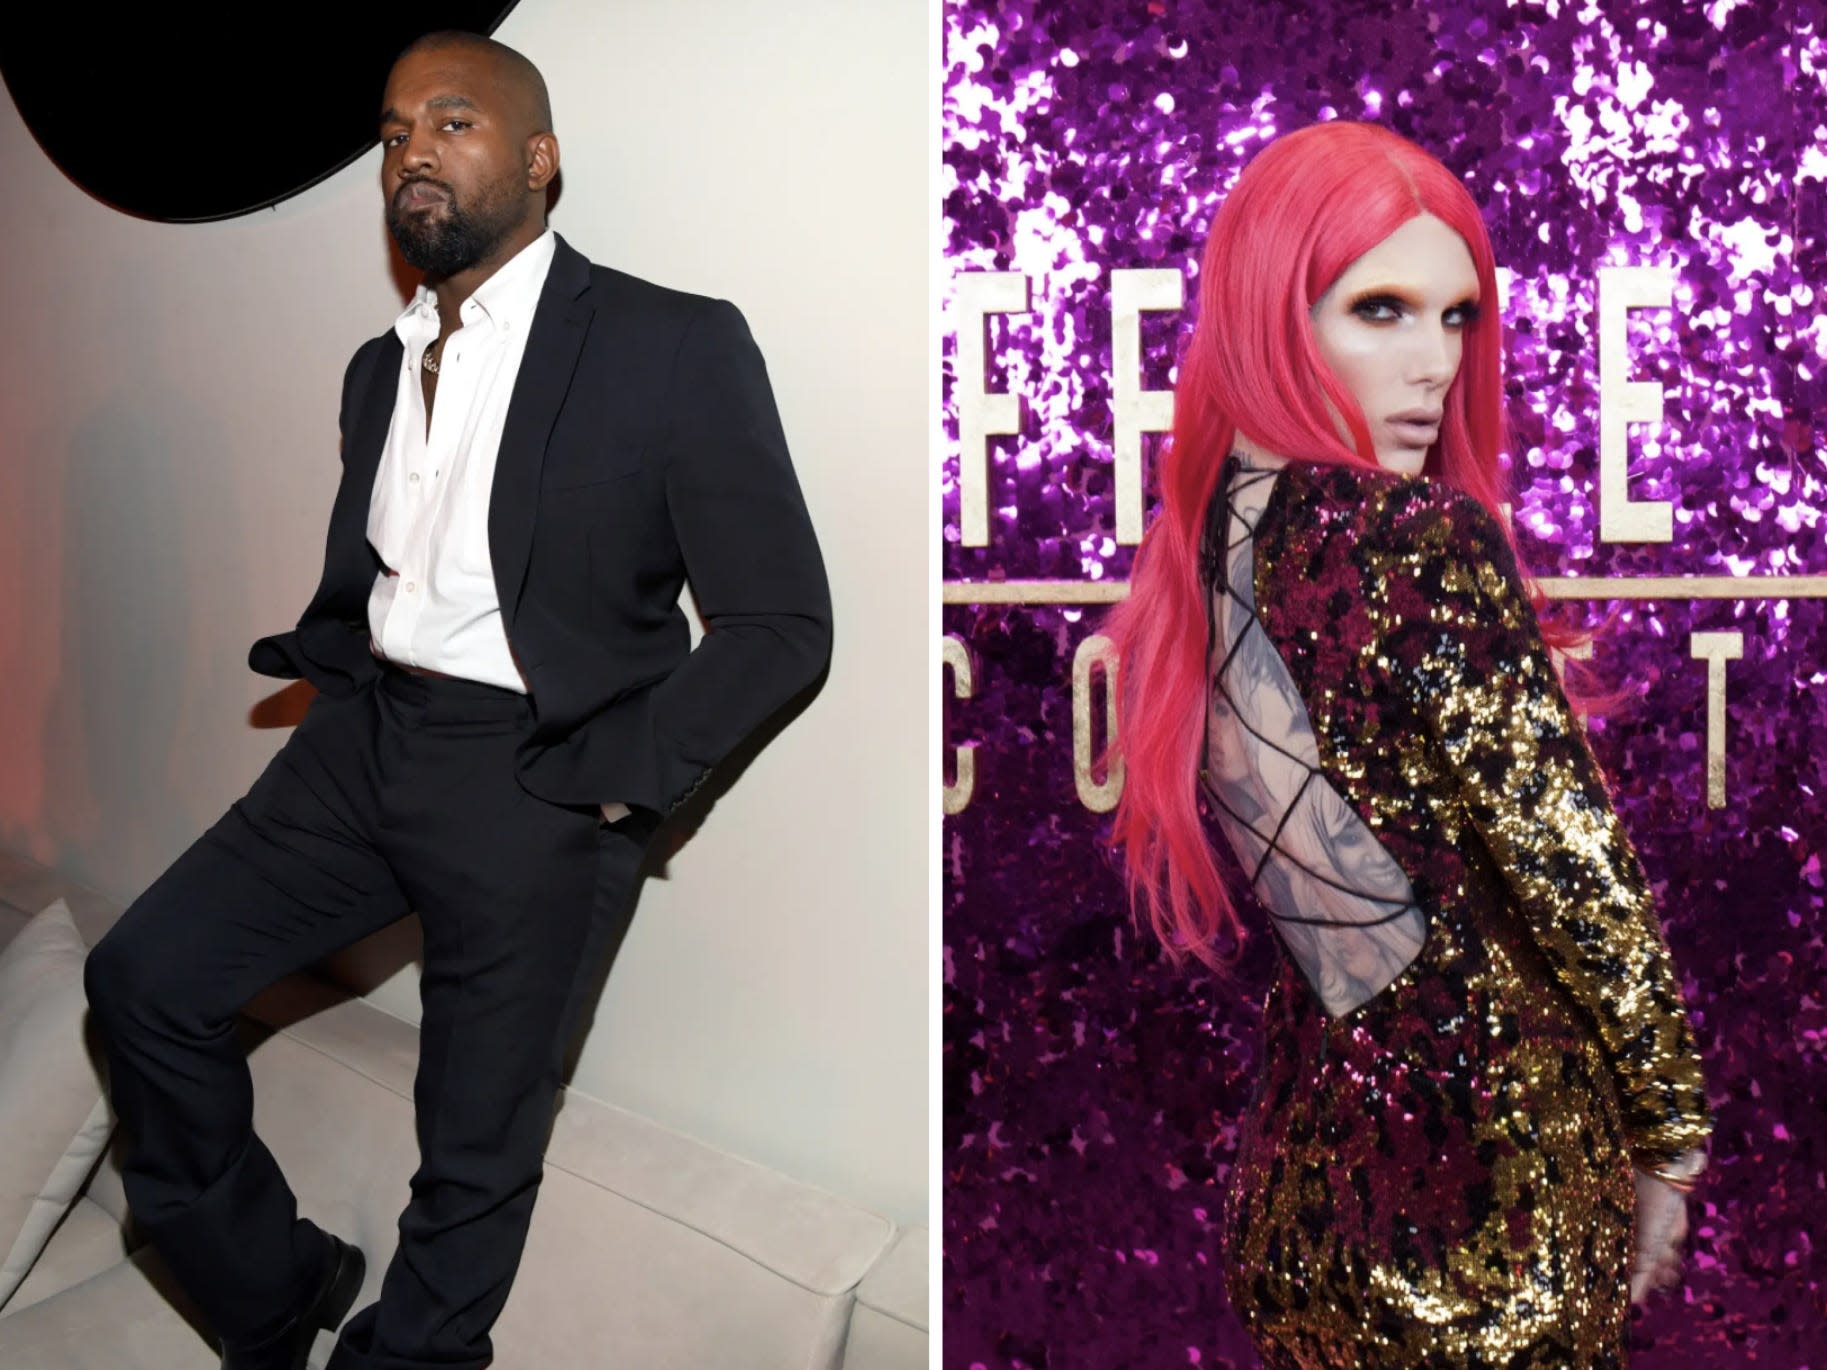 06012021 Jeffree Star and Kanye West leaked video and leaked images sparked...